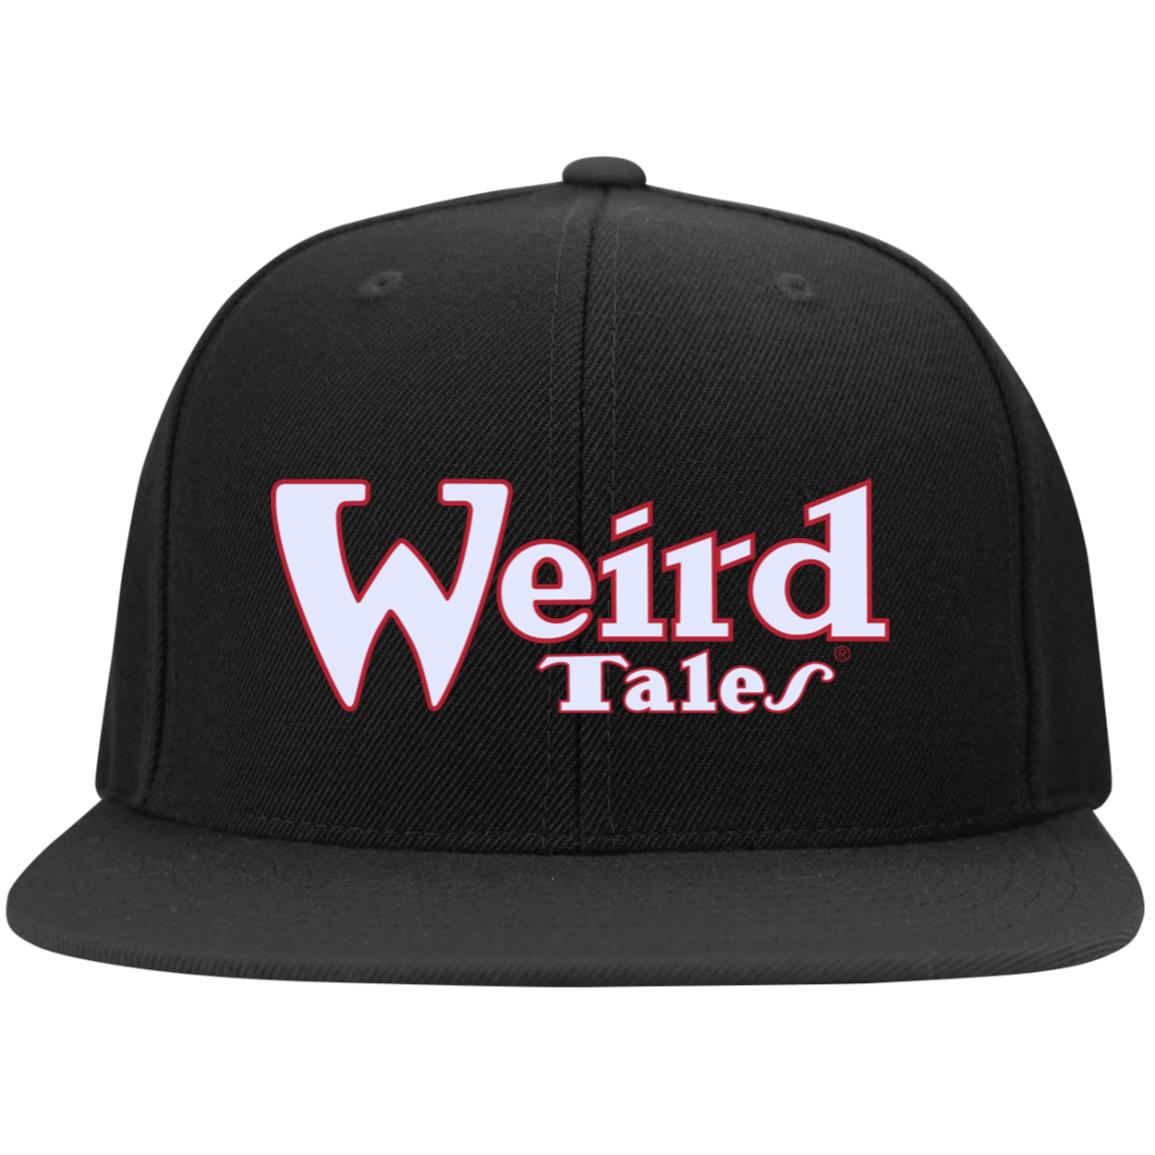 Weird Tales Logo White-Red Embroidered Flat Bill High-Profile Snapback Hat